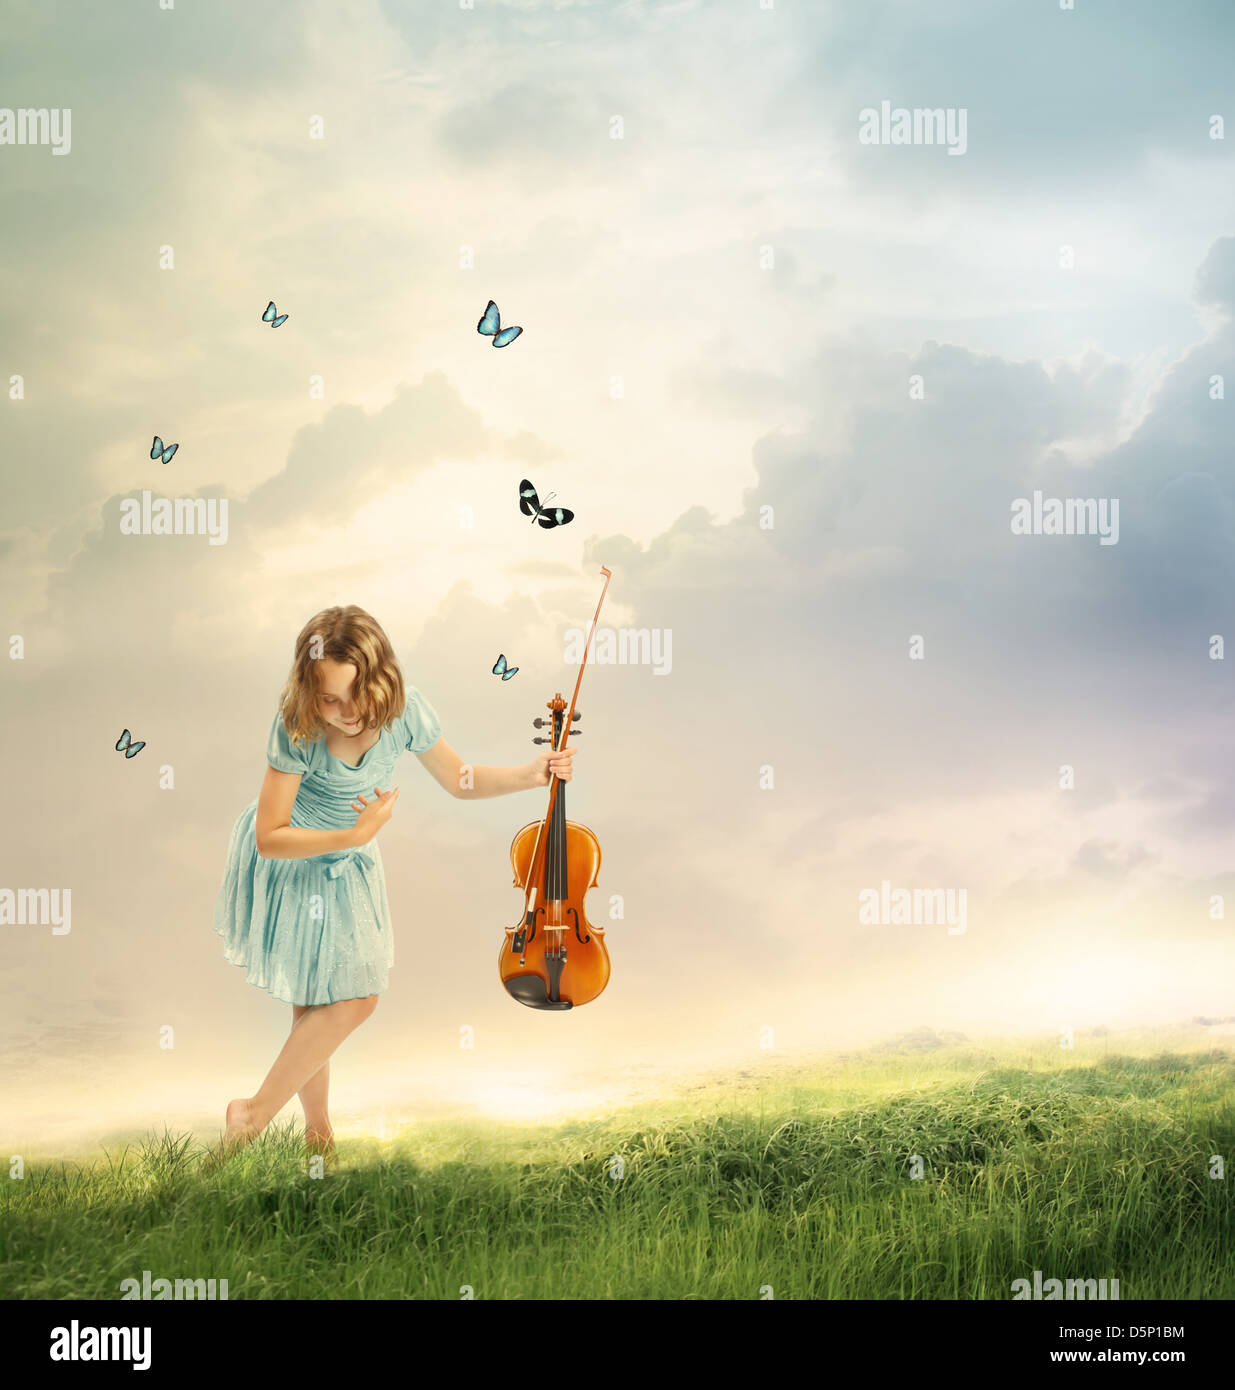 Little girl with a violin in a fantasy landscape with butterflies Stock Photo